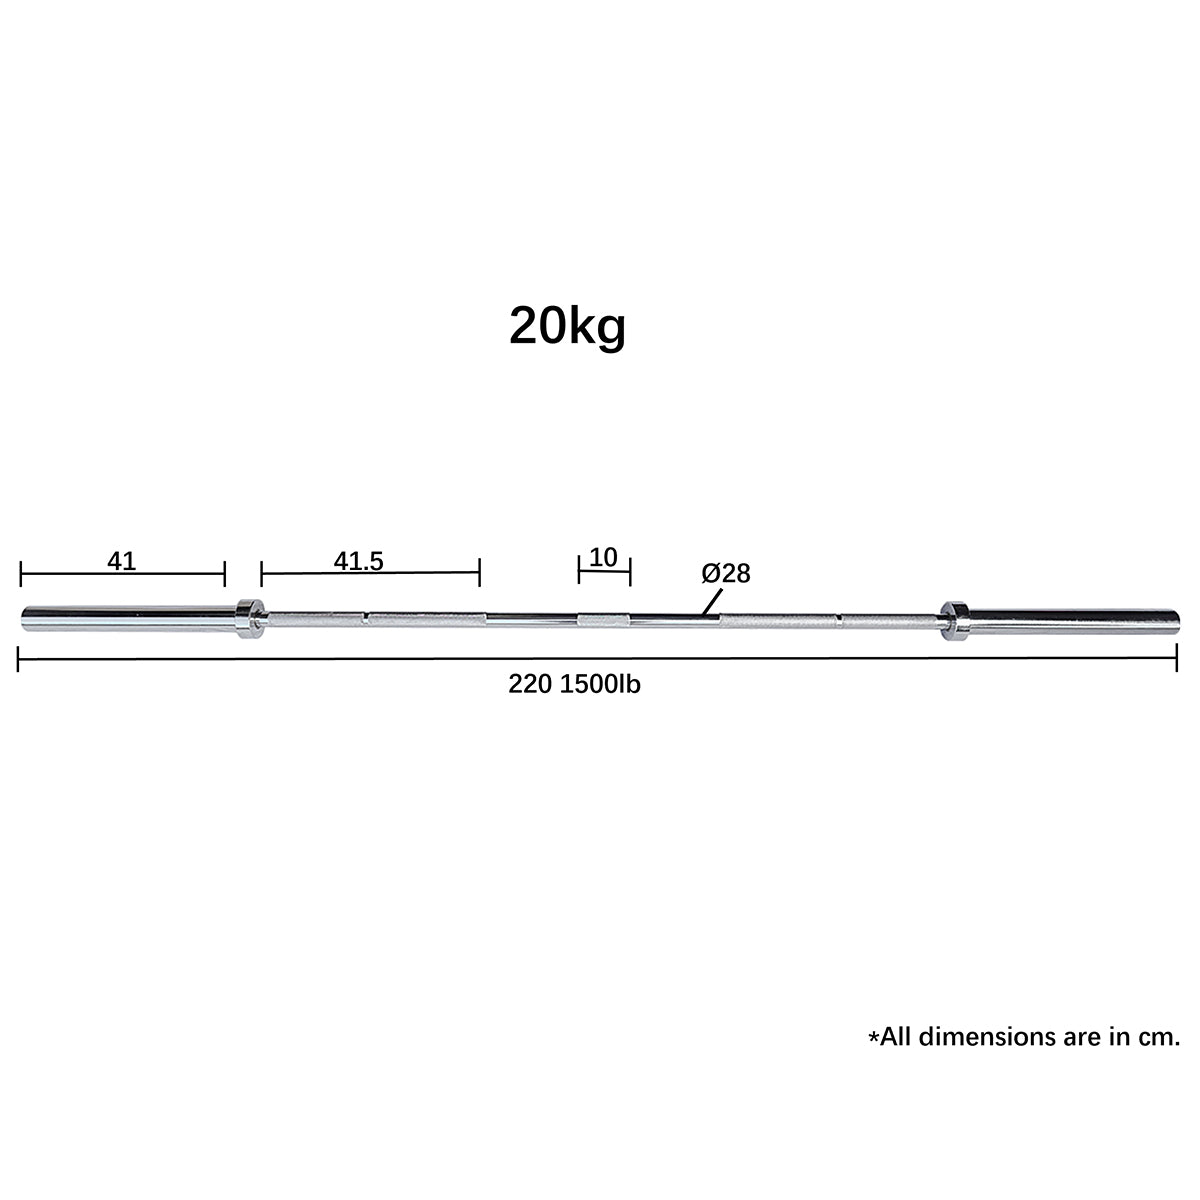 2.2m Olympic 1500lb Straight 20kg Barbell dimensions